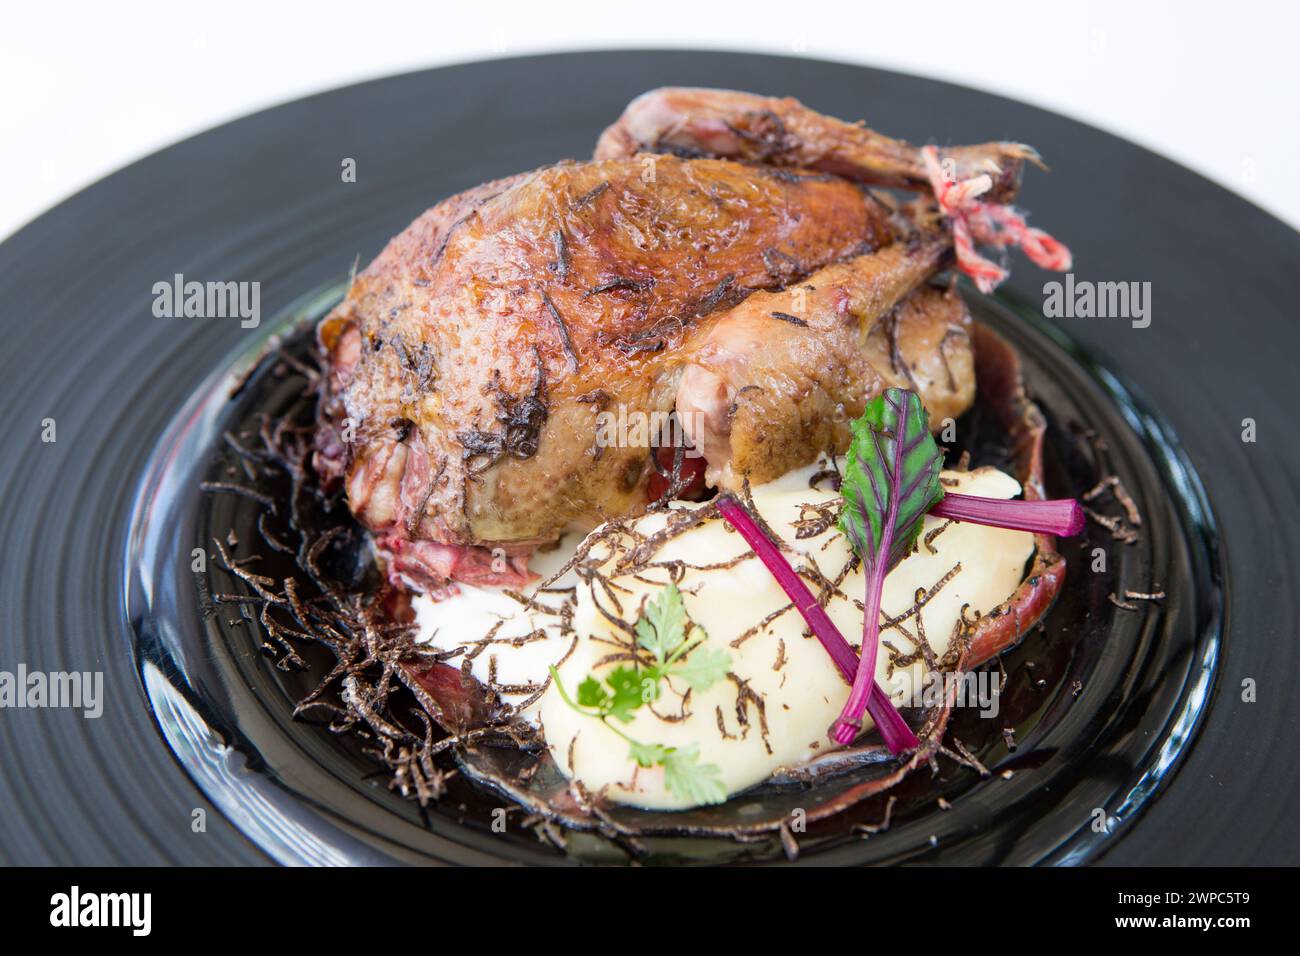 Pigeon de racan roti or roast pigeon is a traditional french culinary dish. Stock Photo